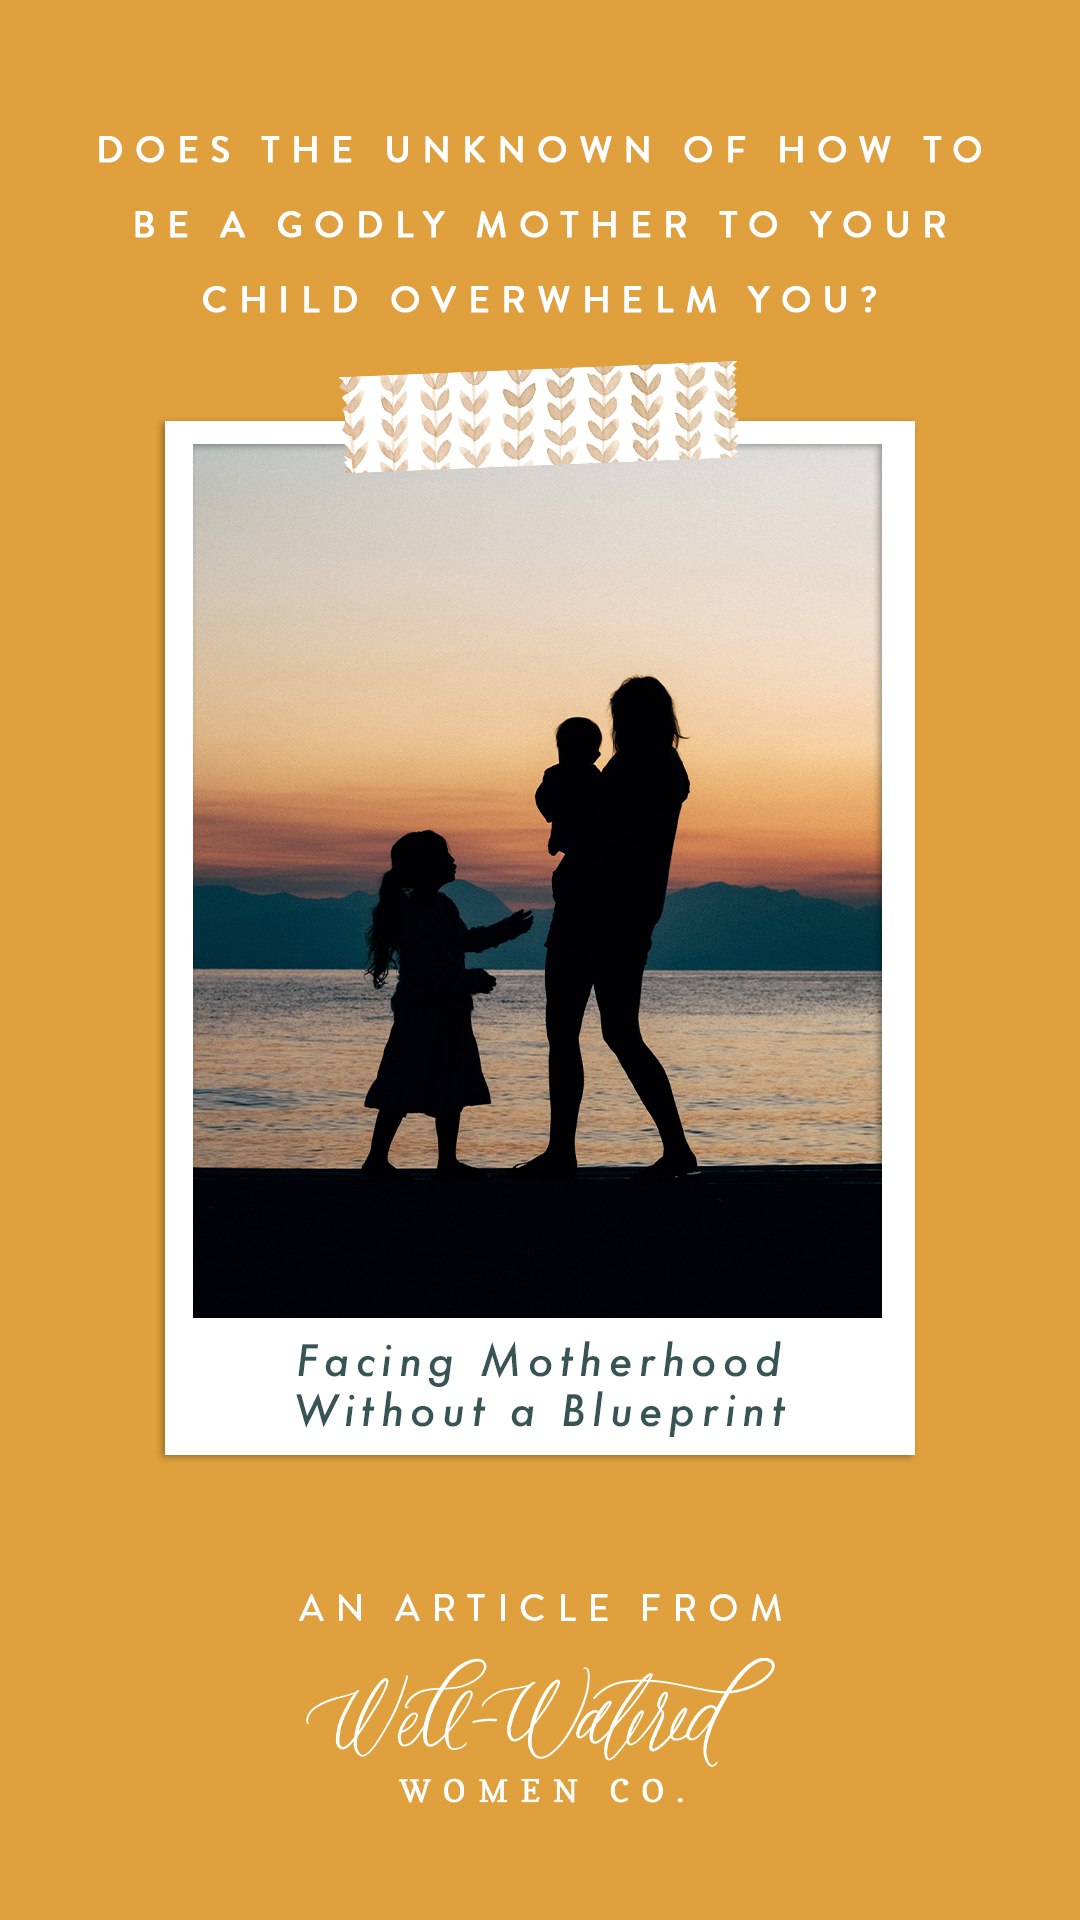 Motherhood Without a Blueprint - An Article by Well-Watered Women